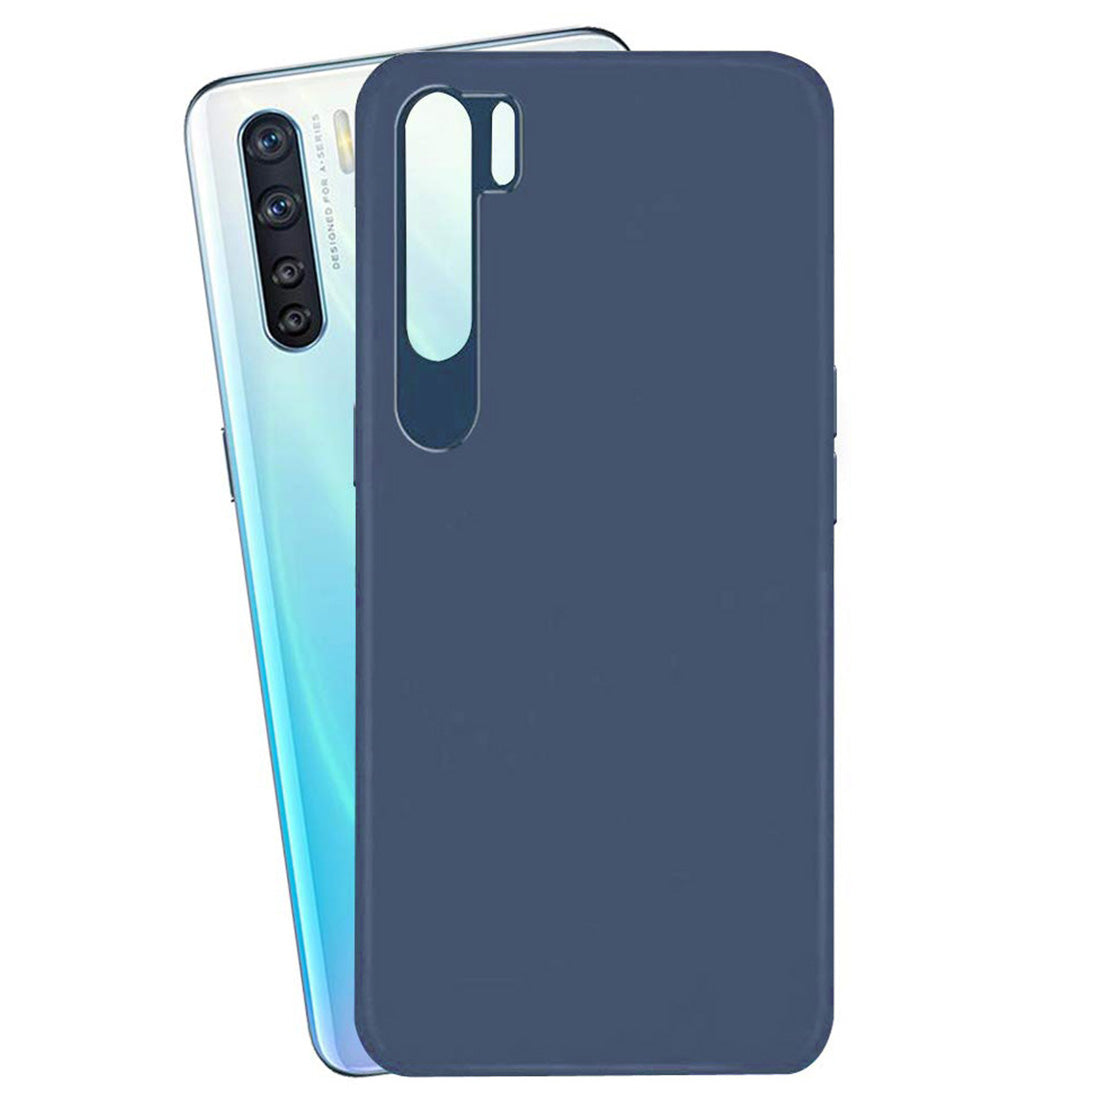 Matte Finish TPU Back Cover for Oppo F15 / Oppo A91